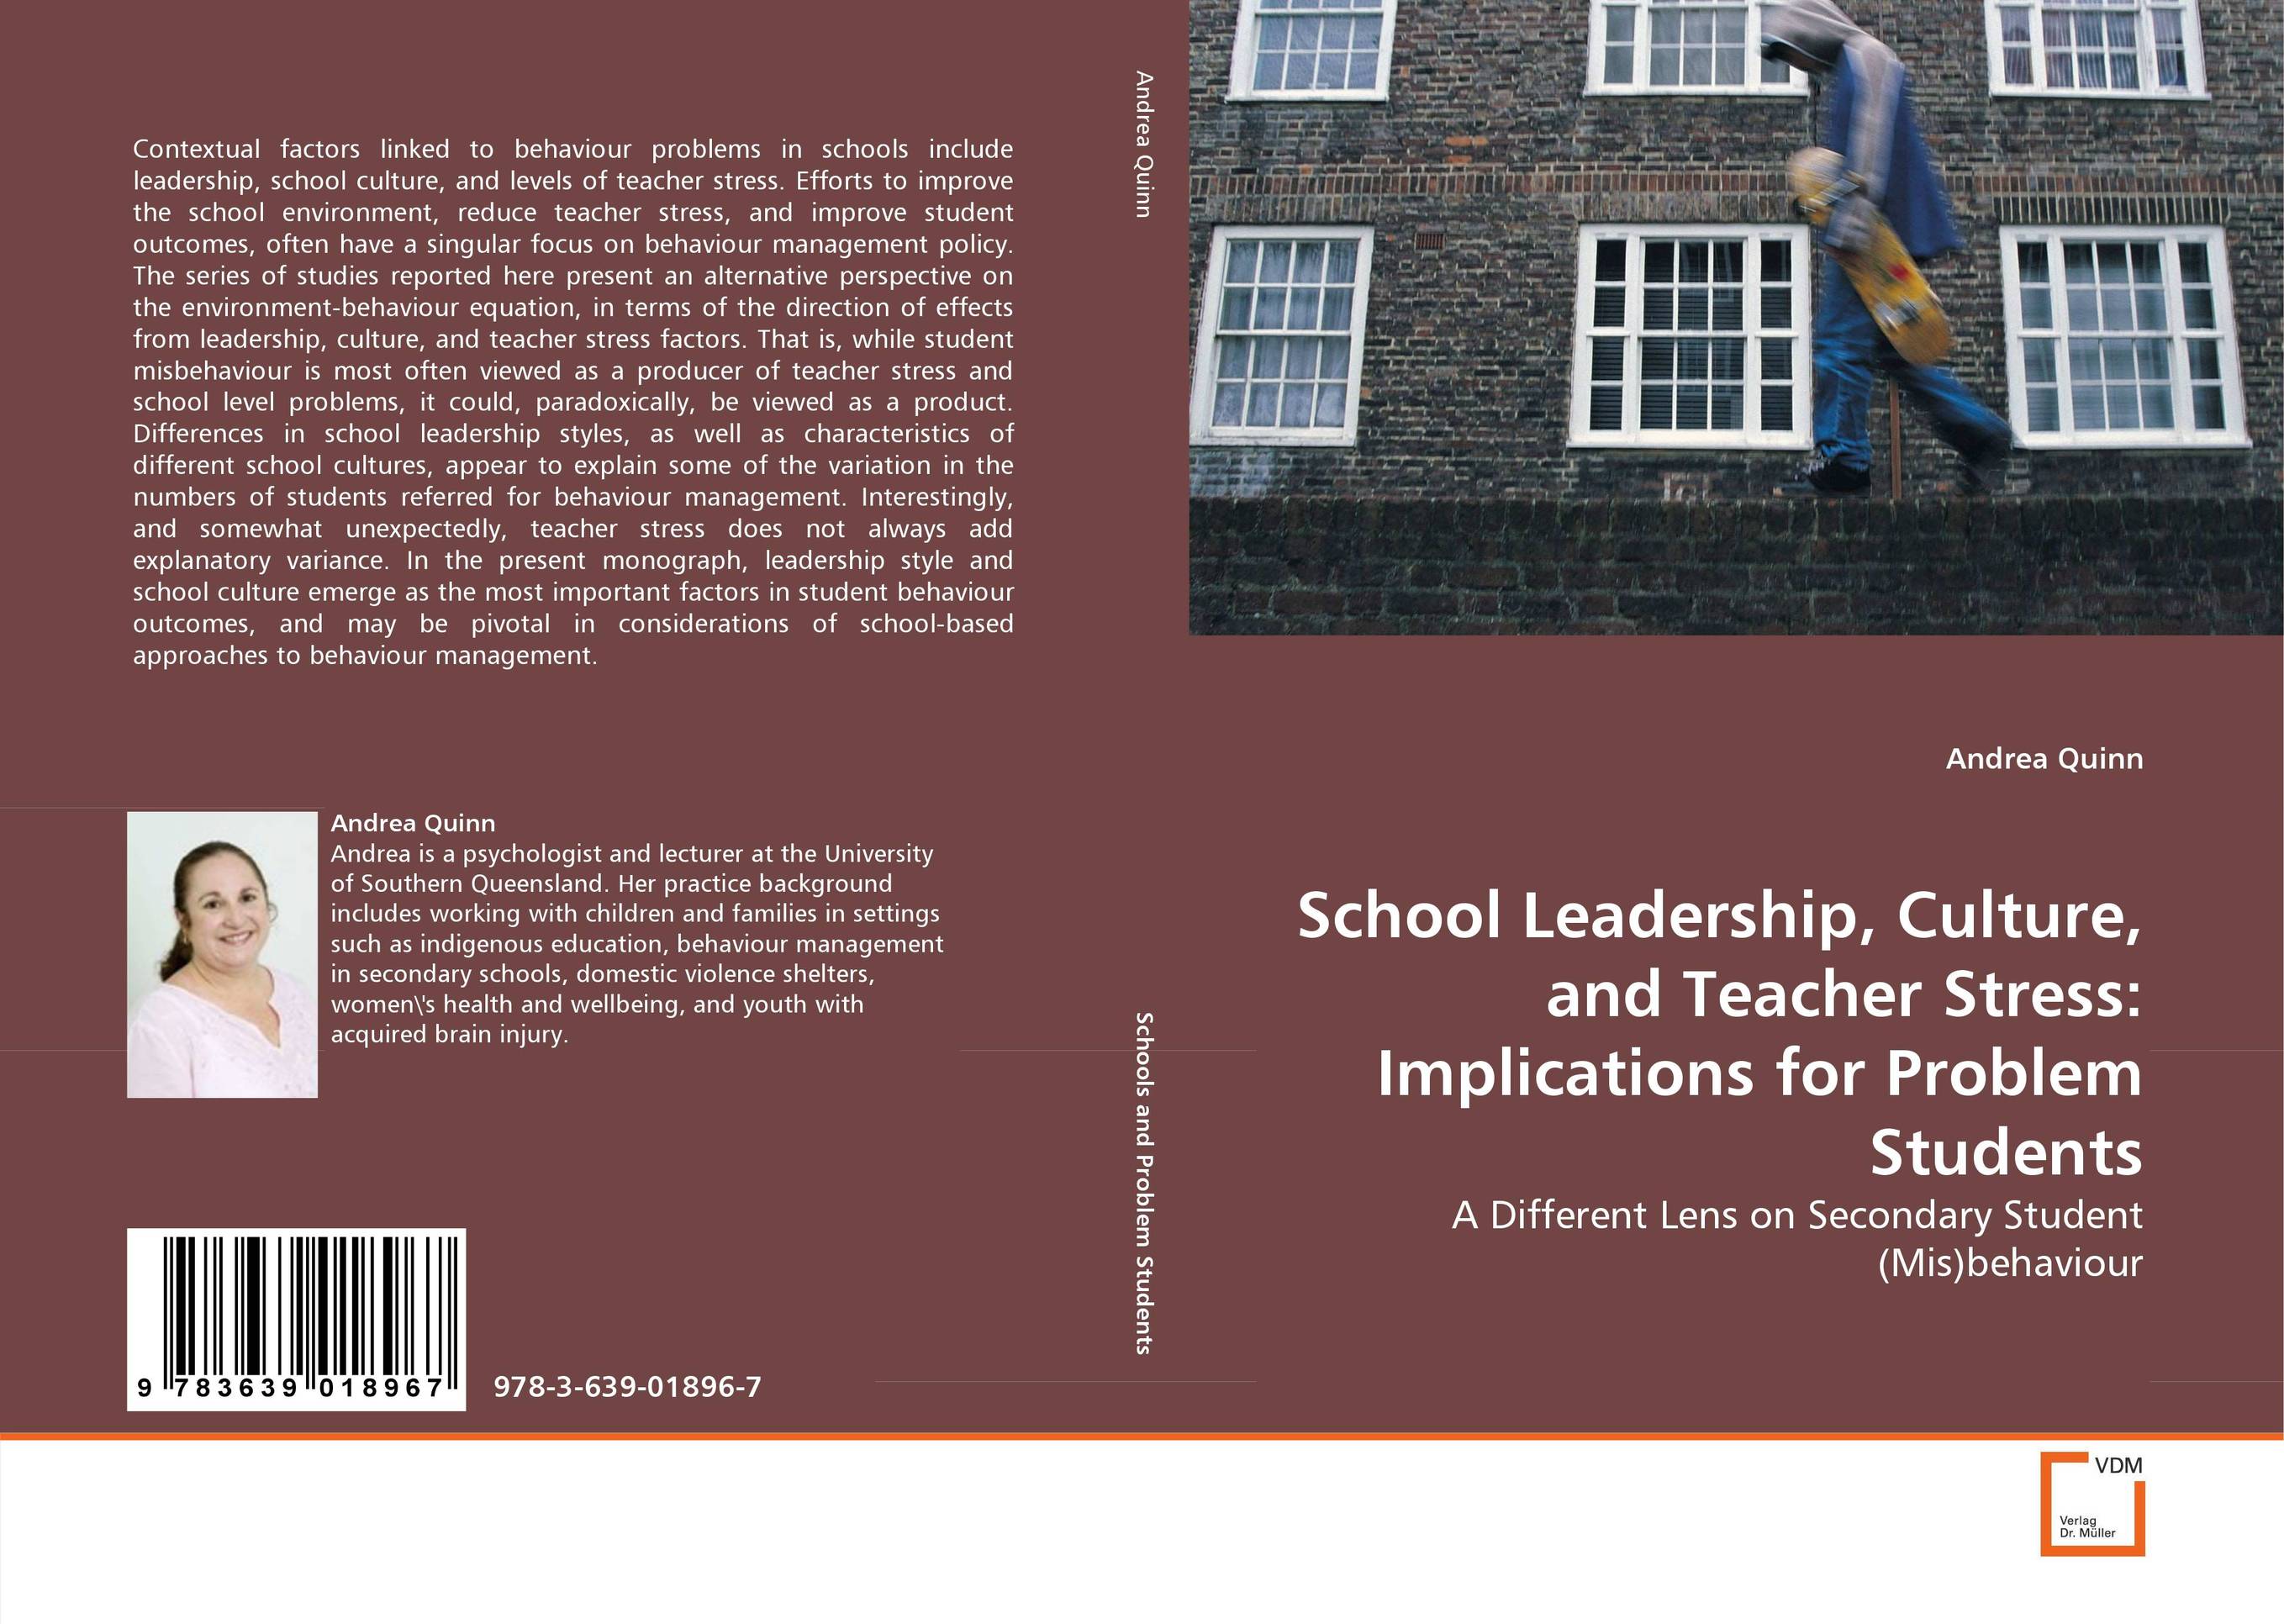 School Leadership, Culture, and Teacher Stress: Implications for Problem Students